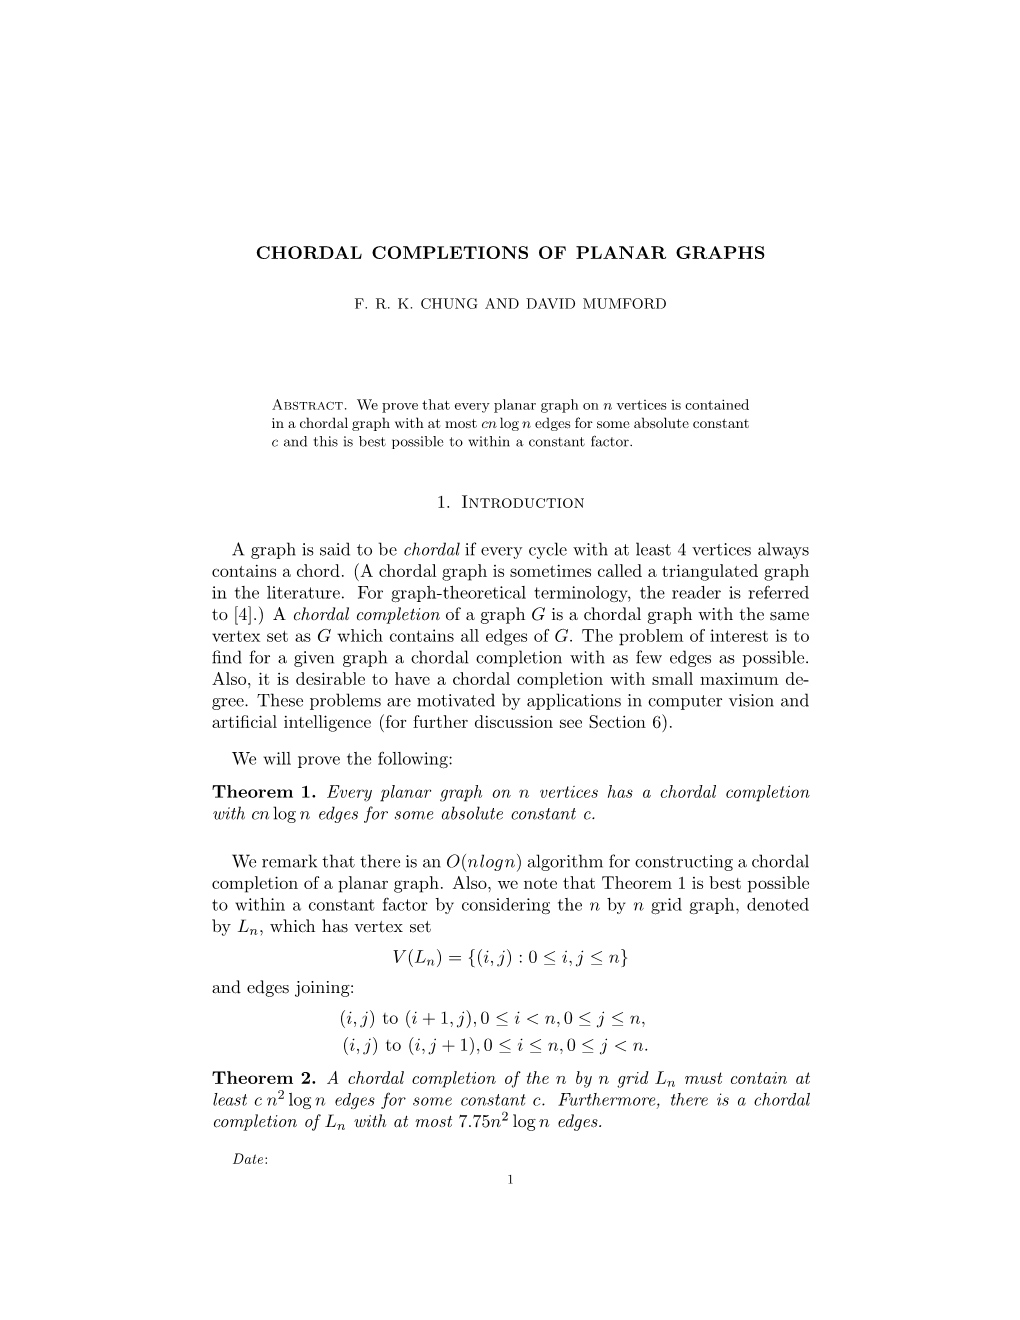 Chordal Completions of Planar Graphs